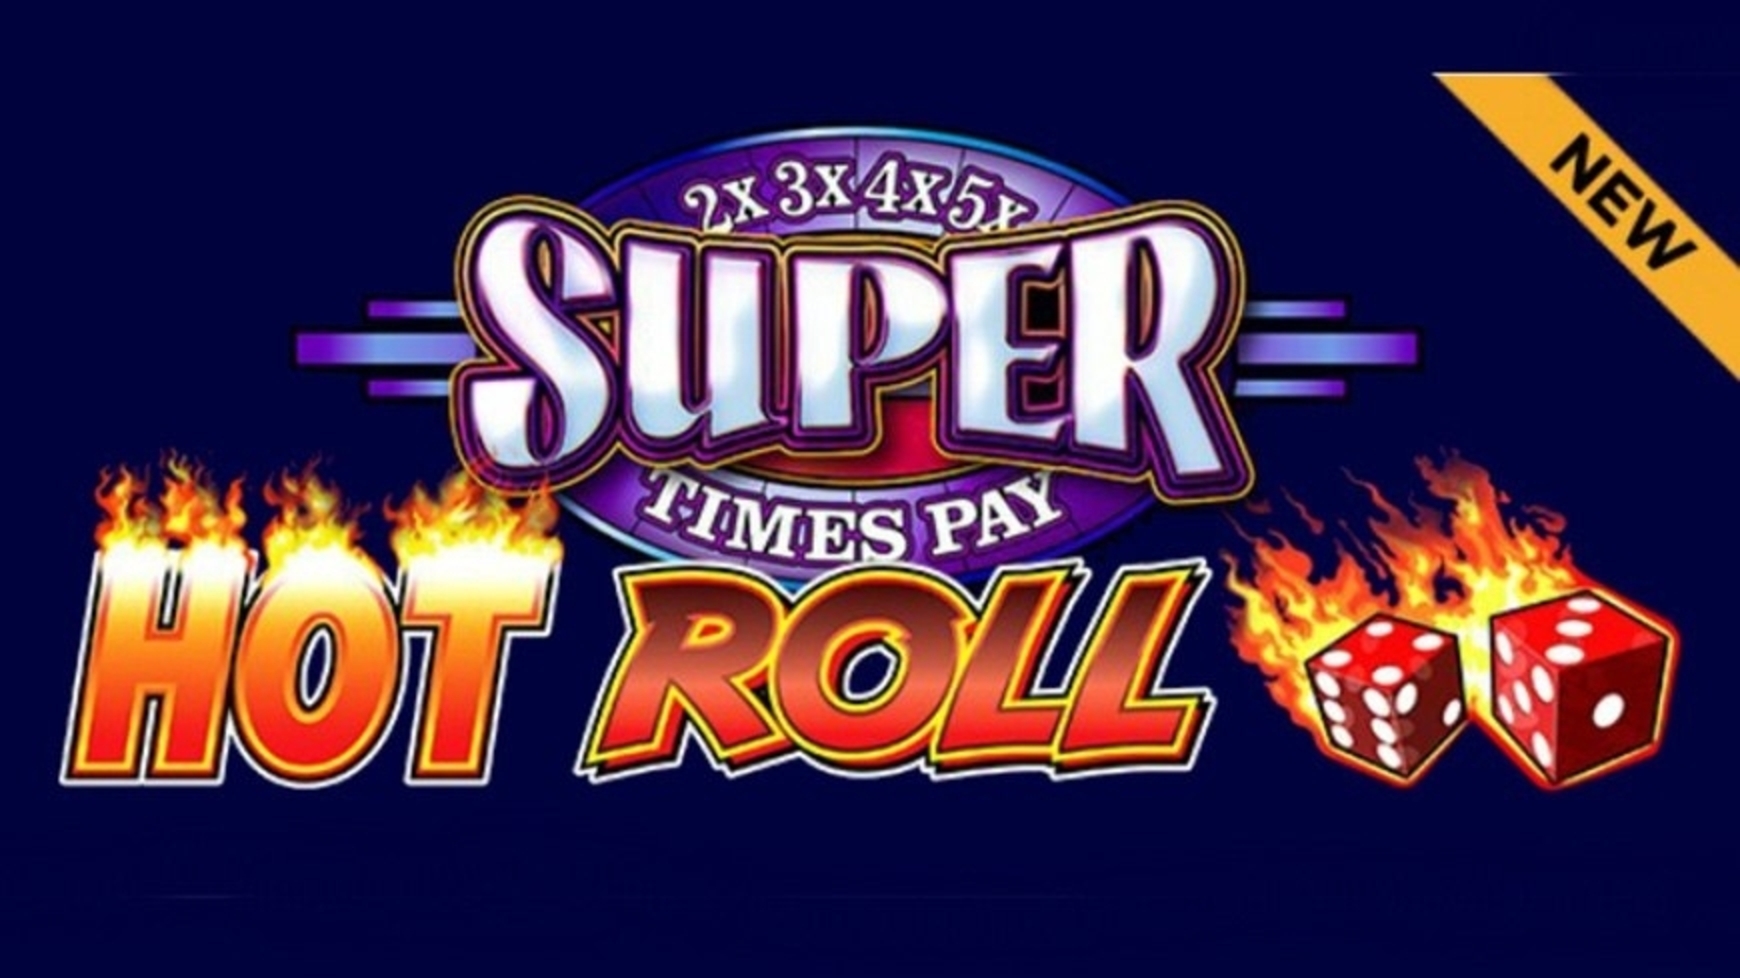 Super Times Pay demo